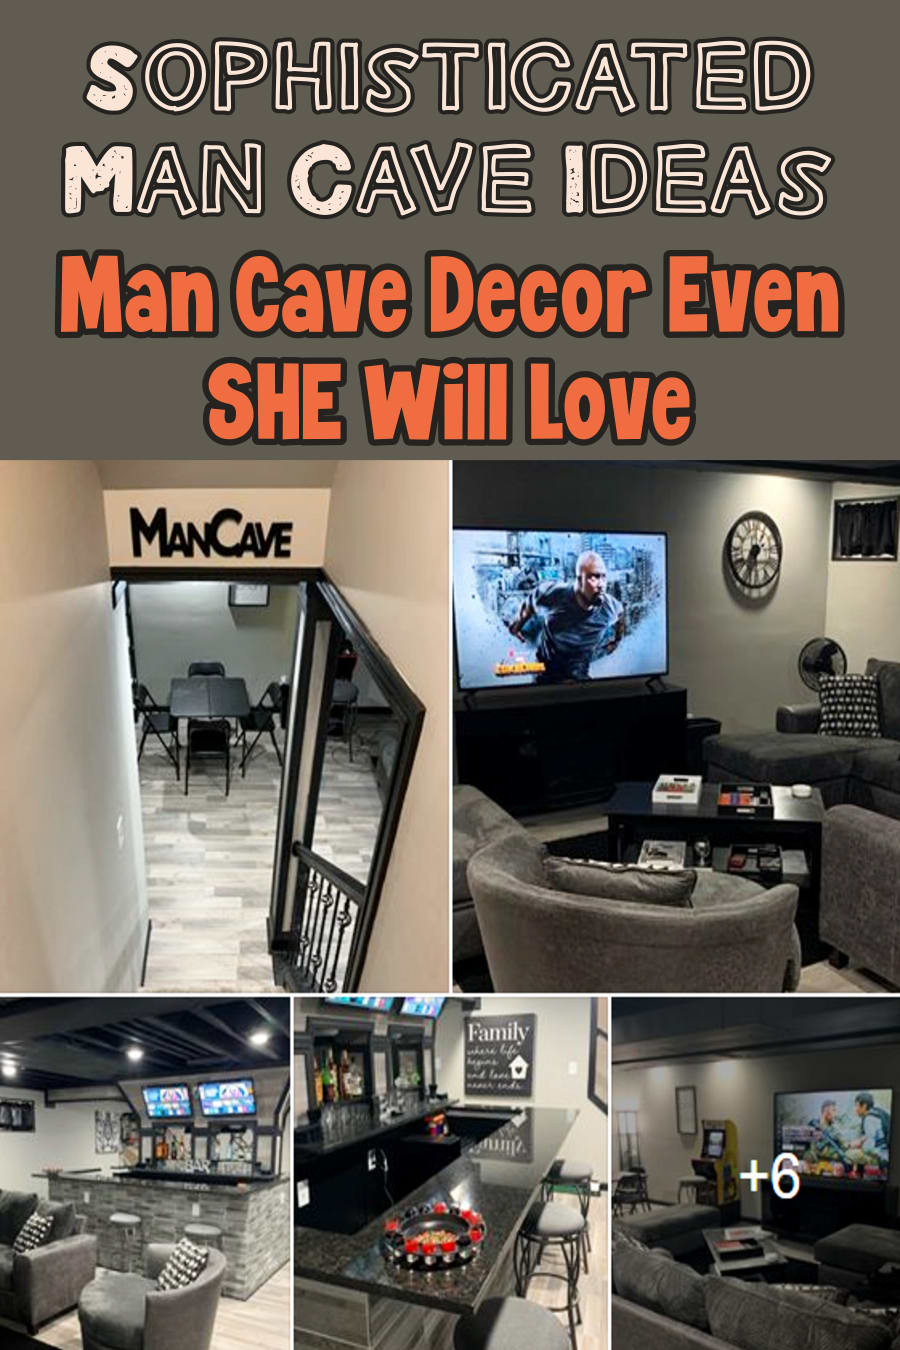 Sophisticated Man Cave Ideas - Man Cave Decor Ideas Even SHE Will Love